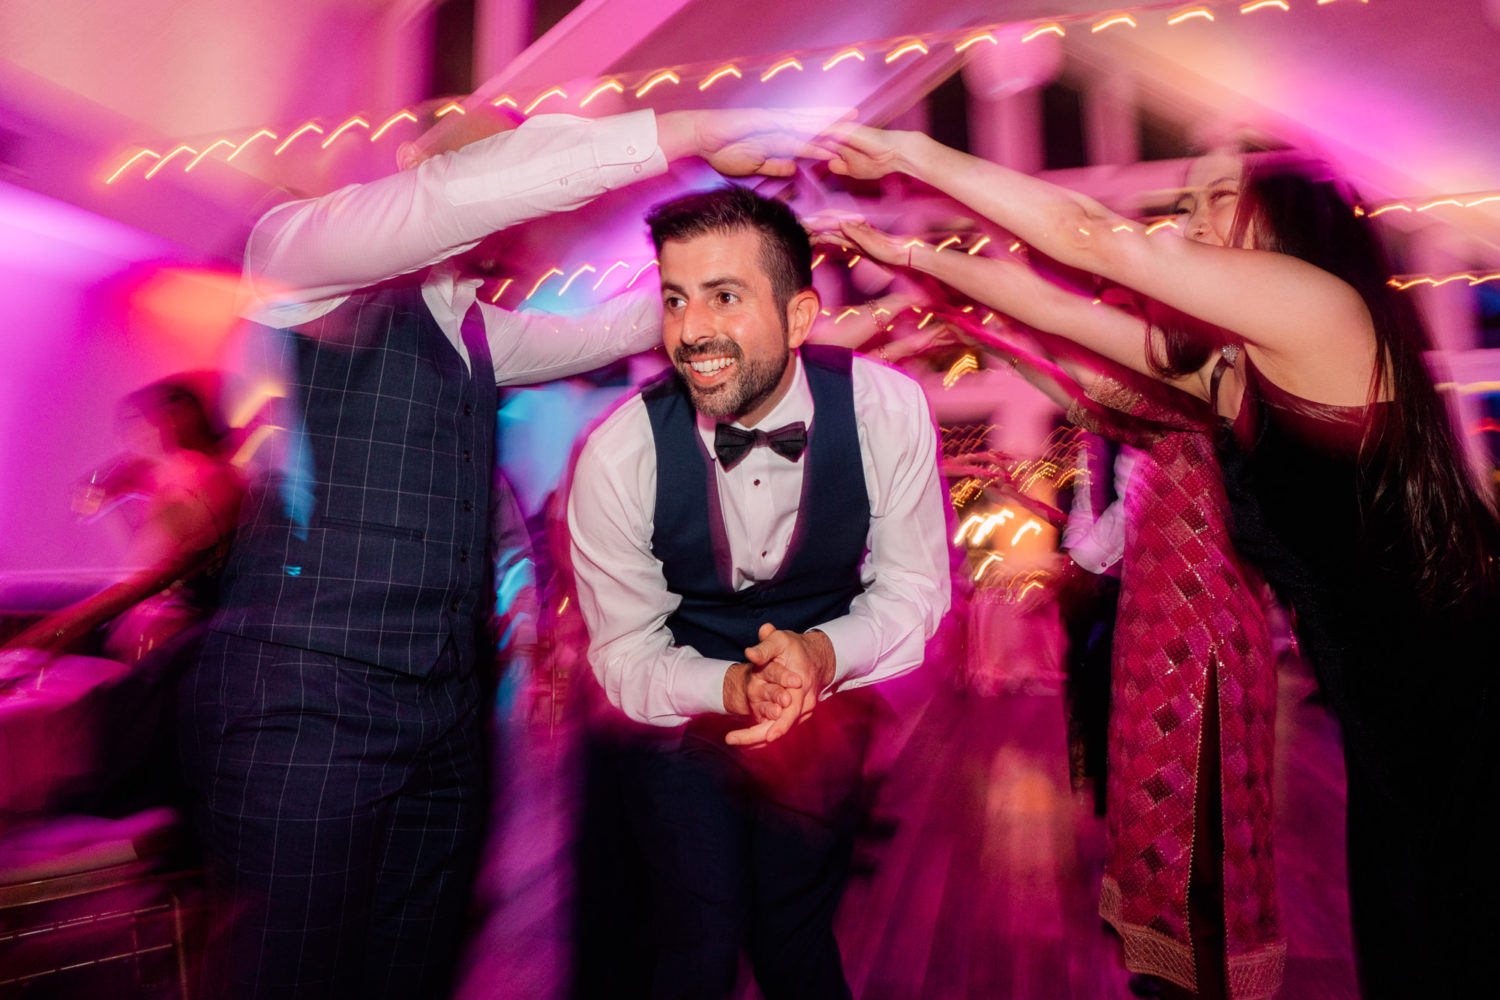 groom having fun during wedding reception dancing with friends